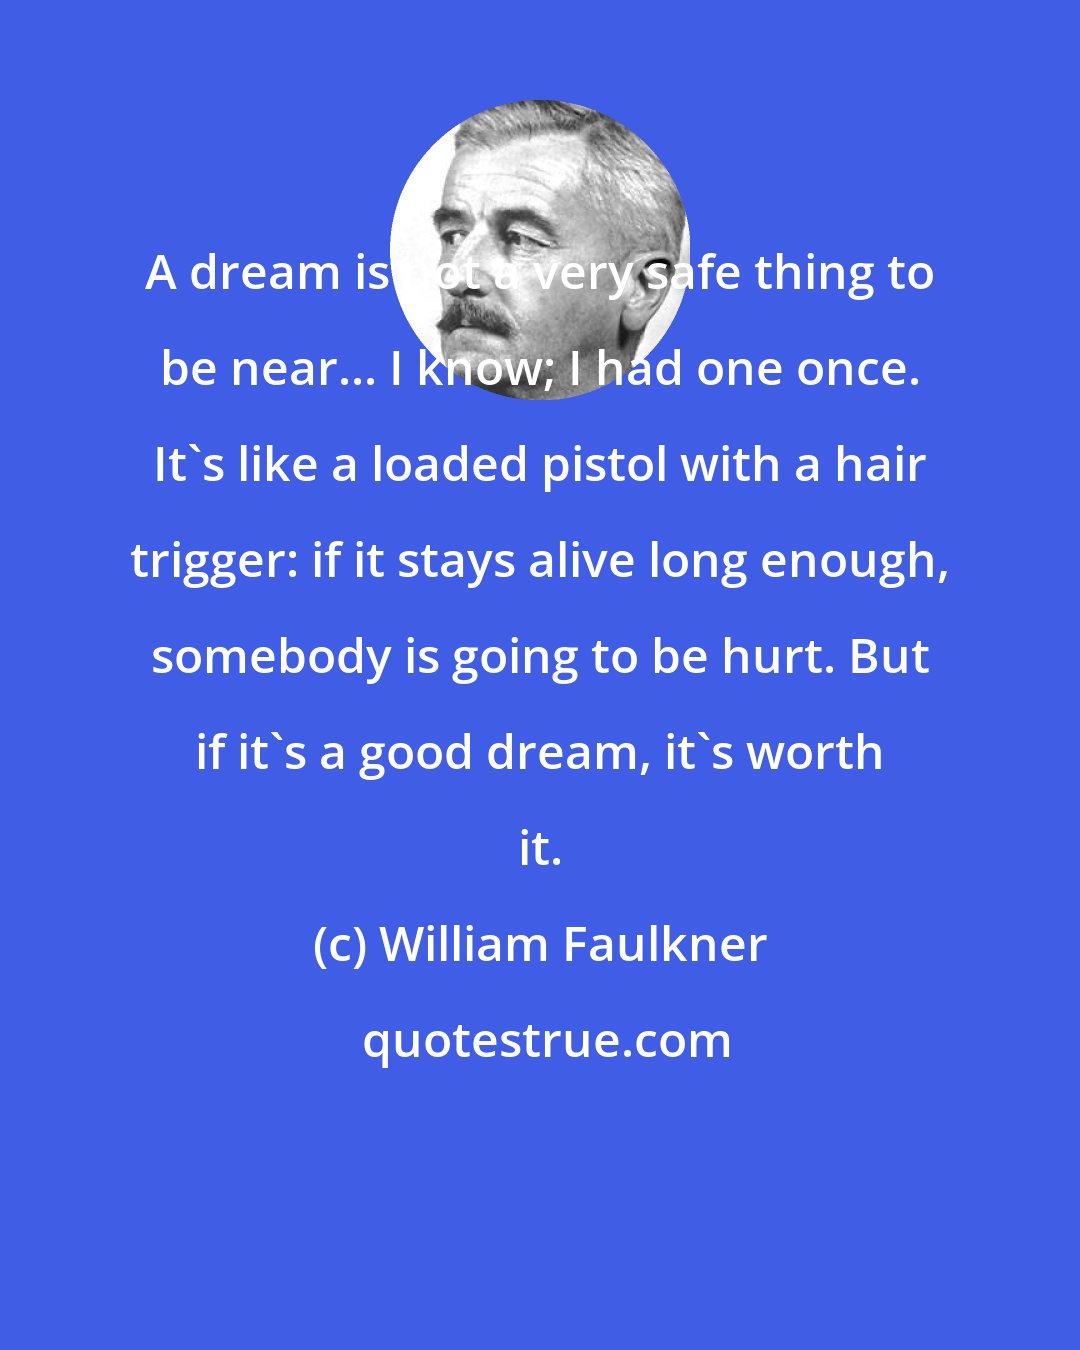 William Faulkner: A dream is not a very safe thing to be near... I know; I had one once. It's like a loaded pistol with a hair trigger: if it stays alive long enough, somebody is going to be hurt. But if it's a good dream, it's worth it.